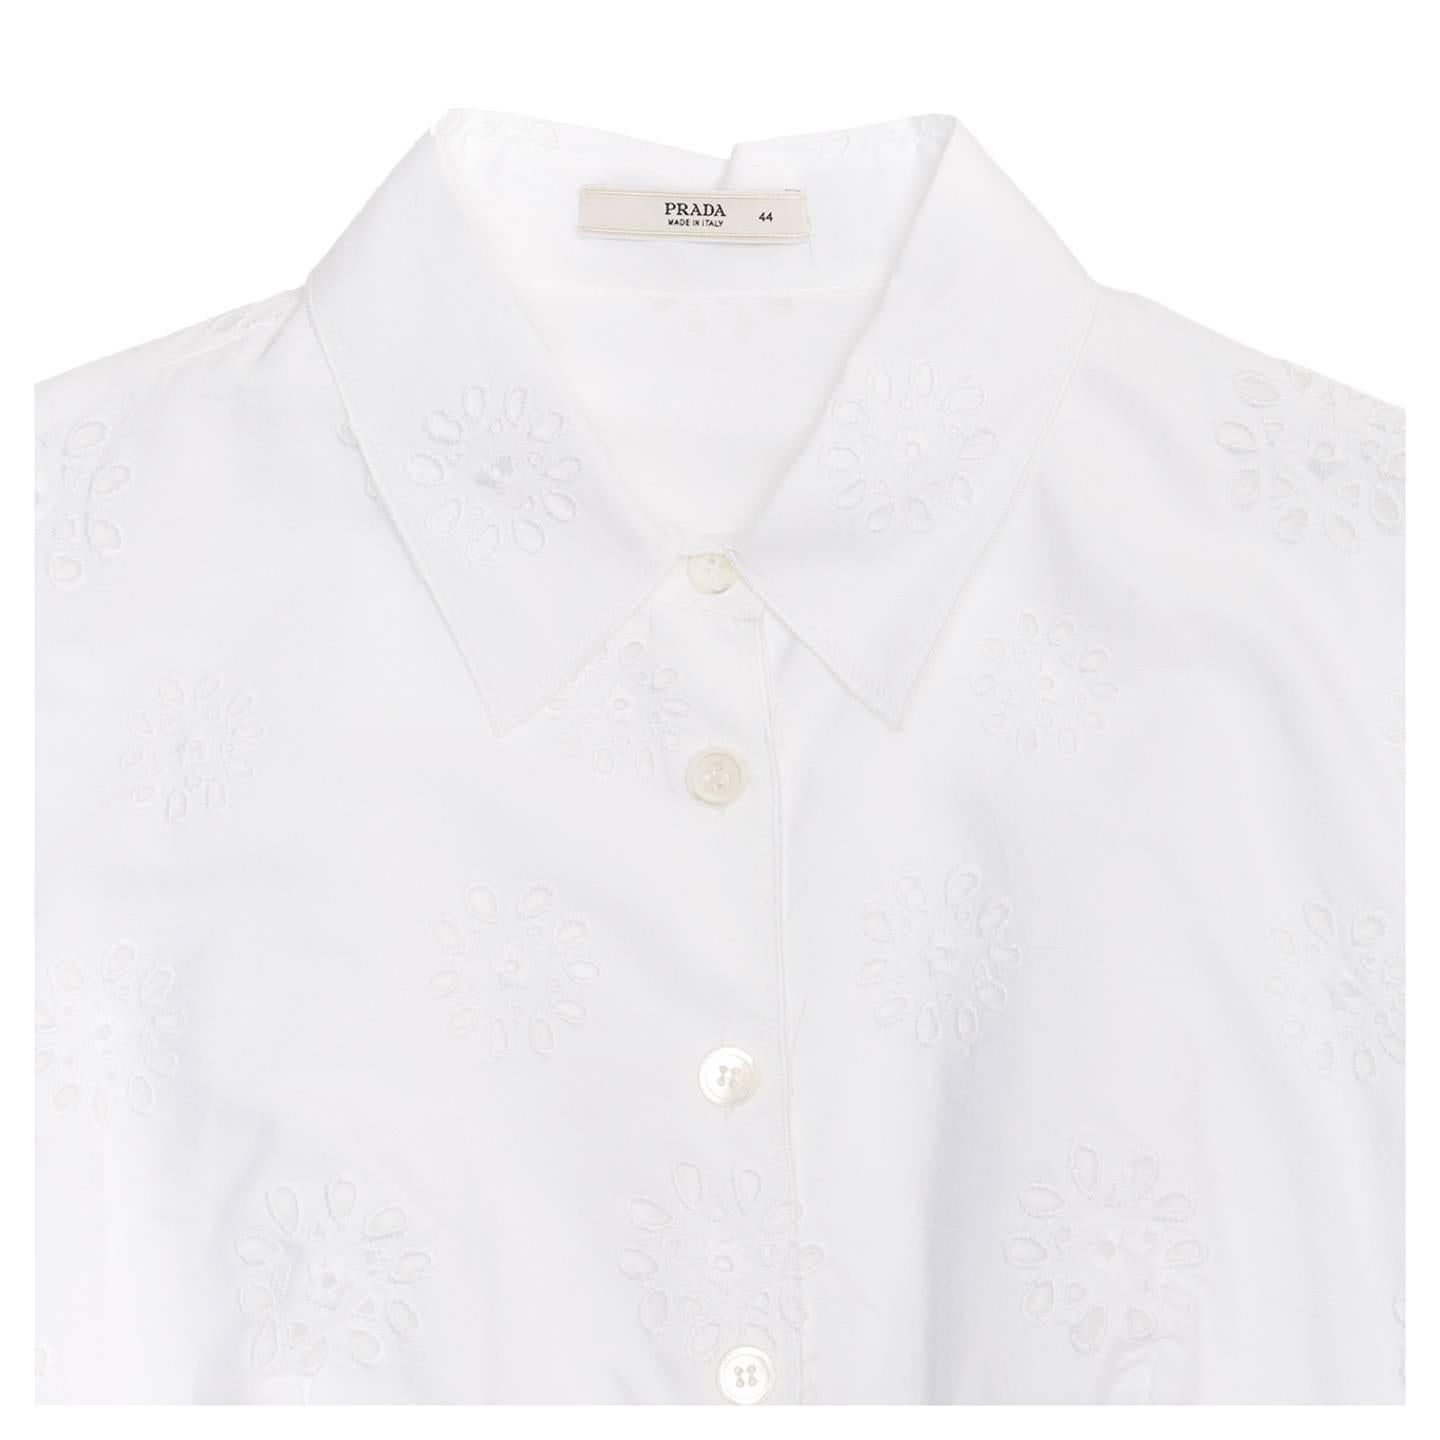 Prada White Cotton Eyelet Shirtdress In Excellent Condition For Sale In Brooklyn, NY